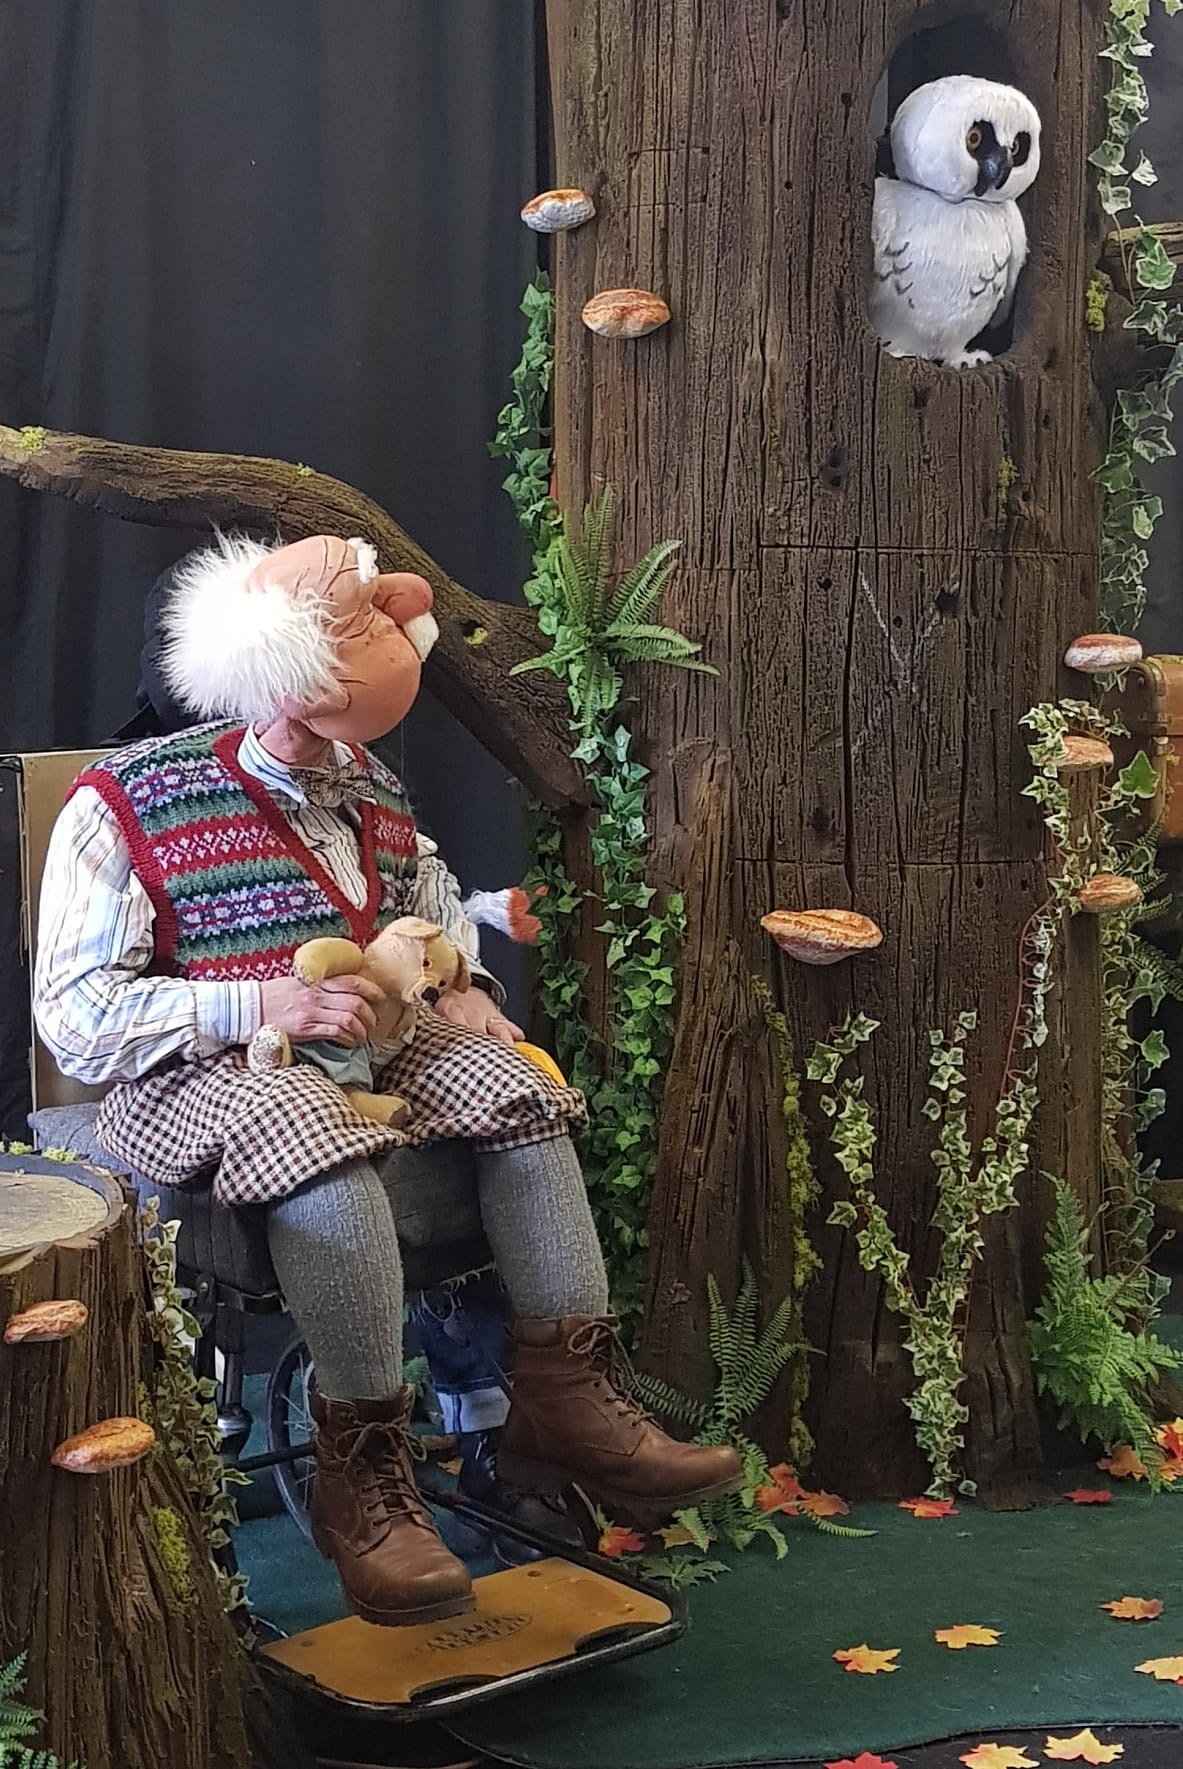 A puppet granddad looks up at an owl in a tree